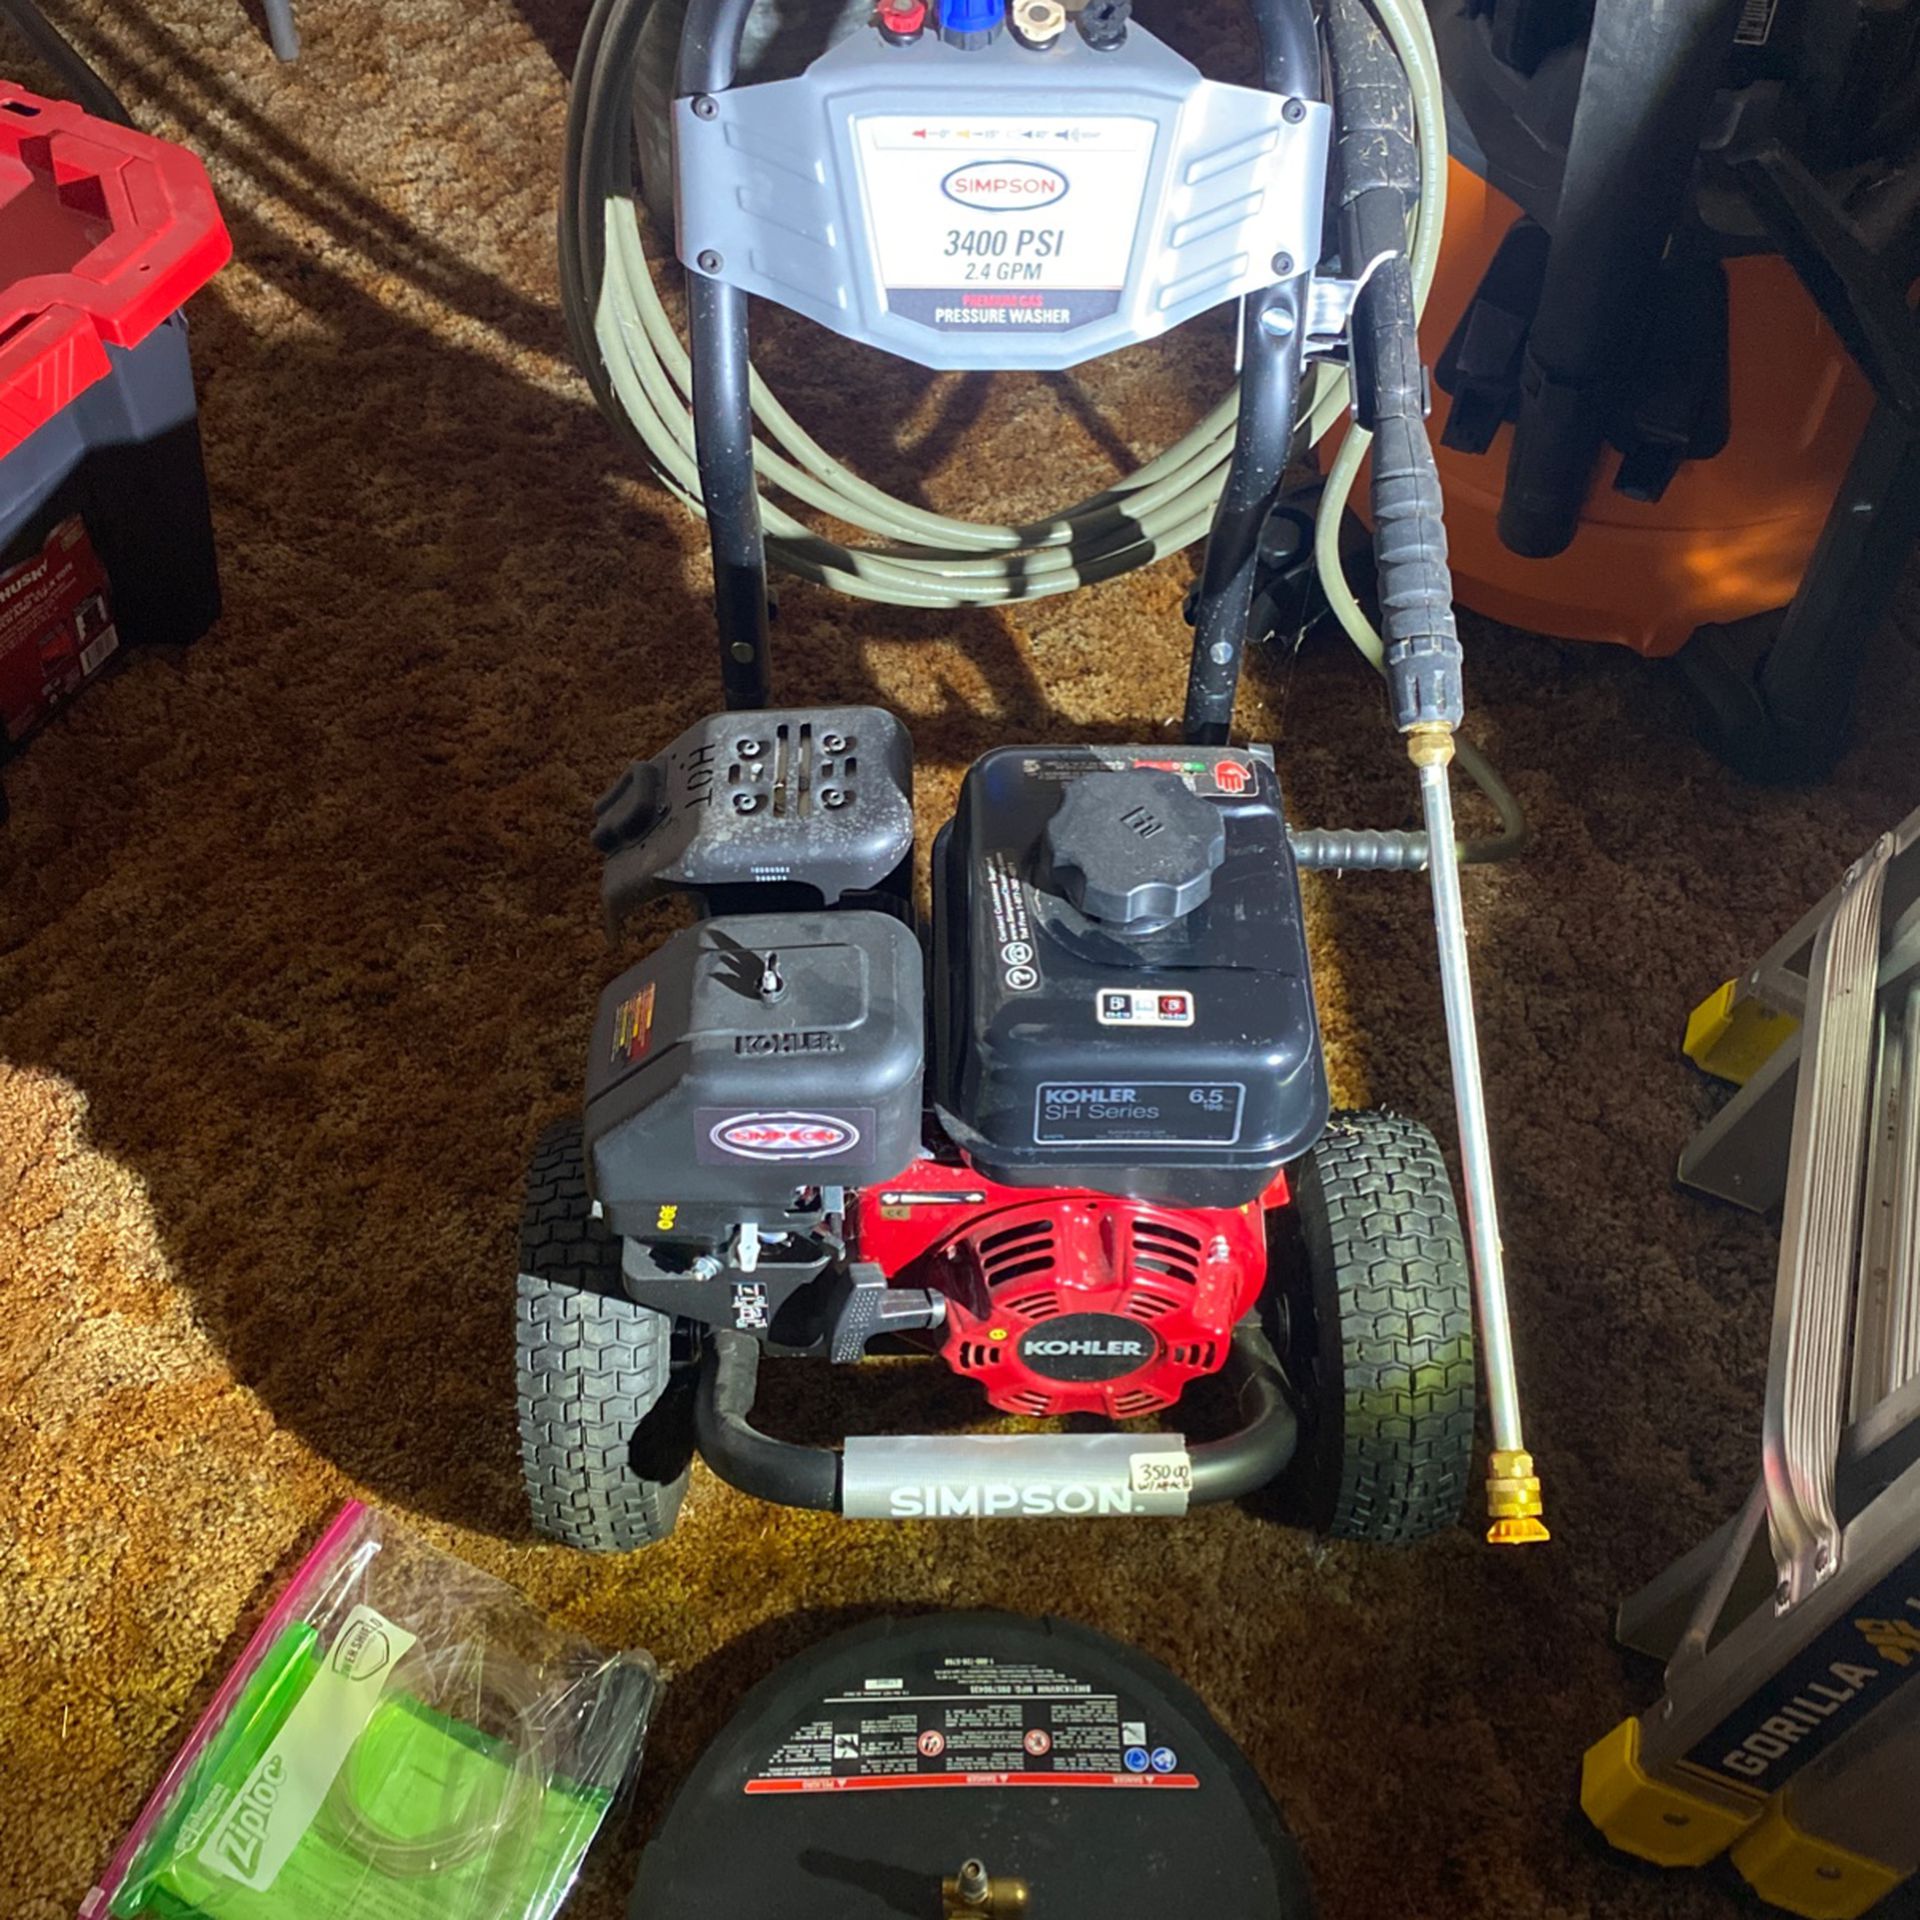 Simpson Power Washer 3400psi With Black Max Attachment Used One Time